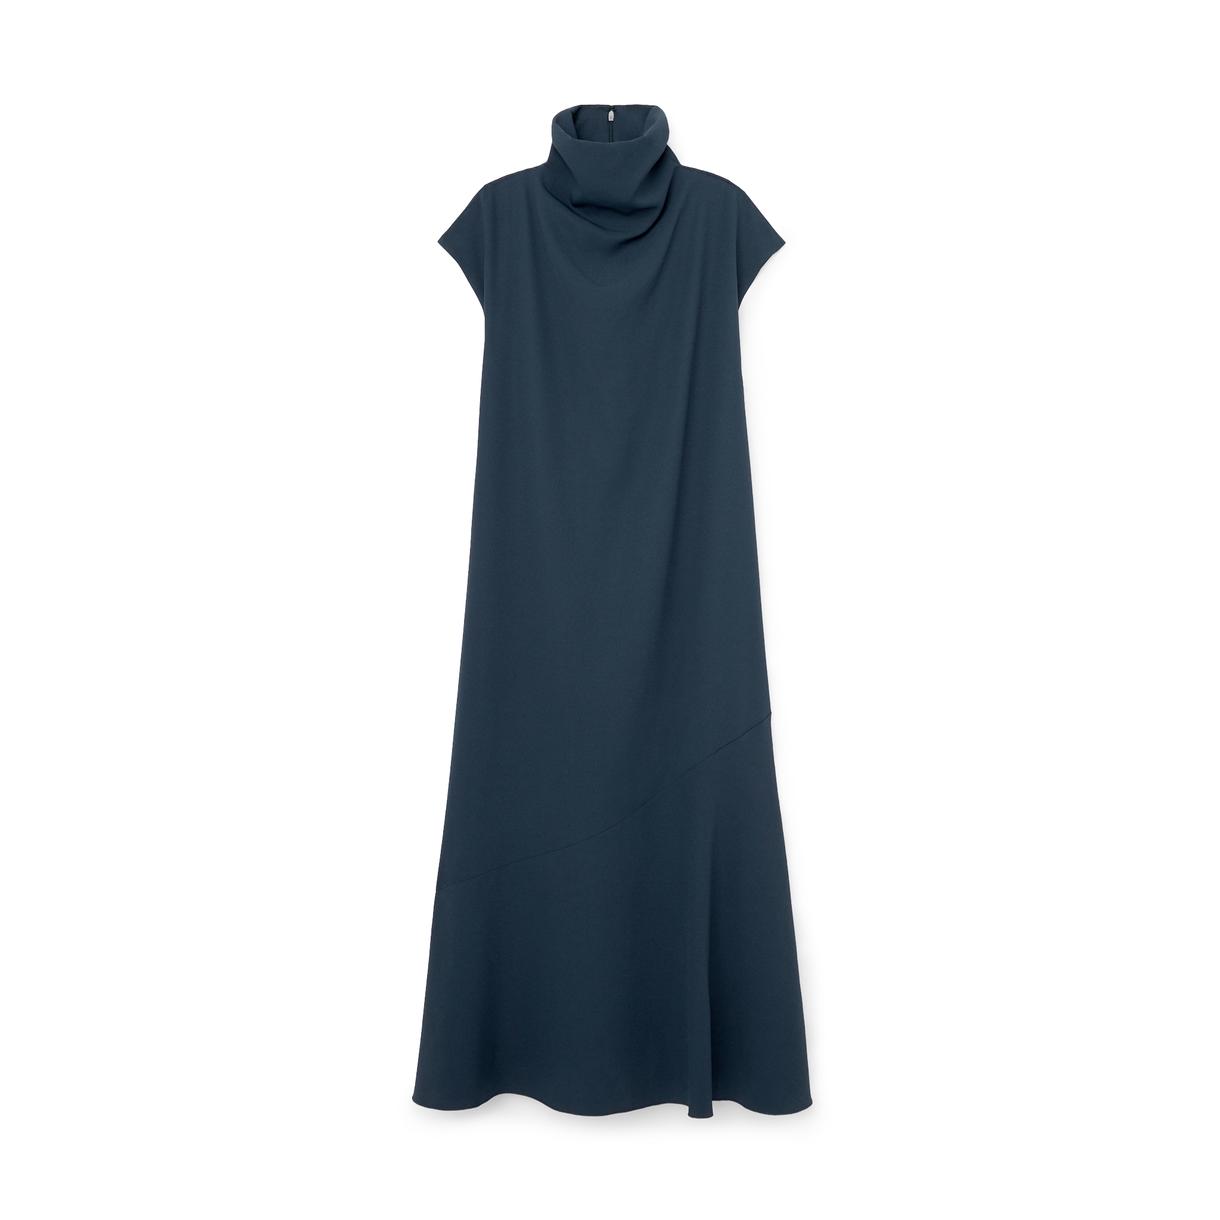 G. Label by goop Valy High-Neck A-Line Dress